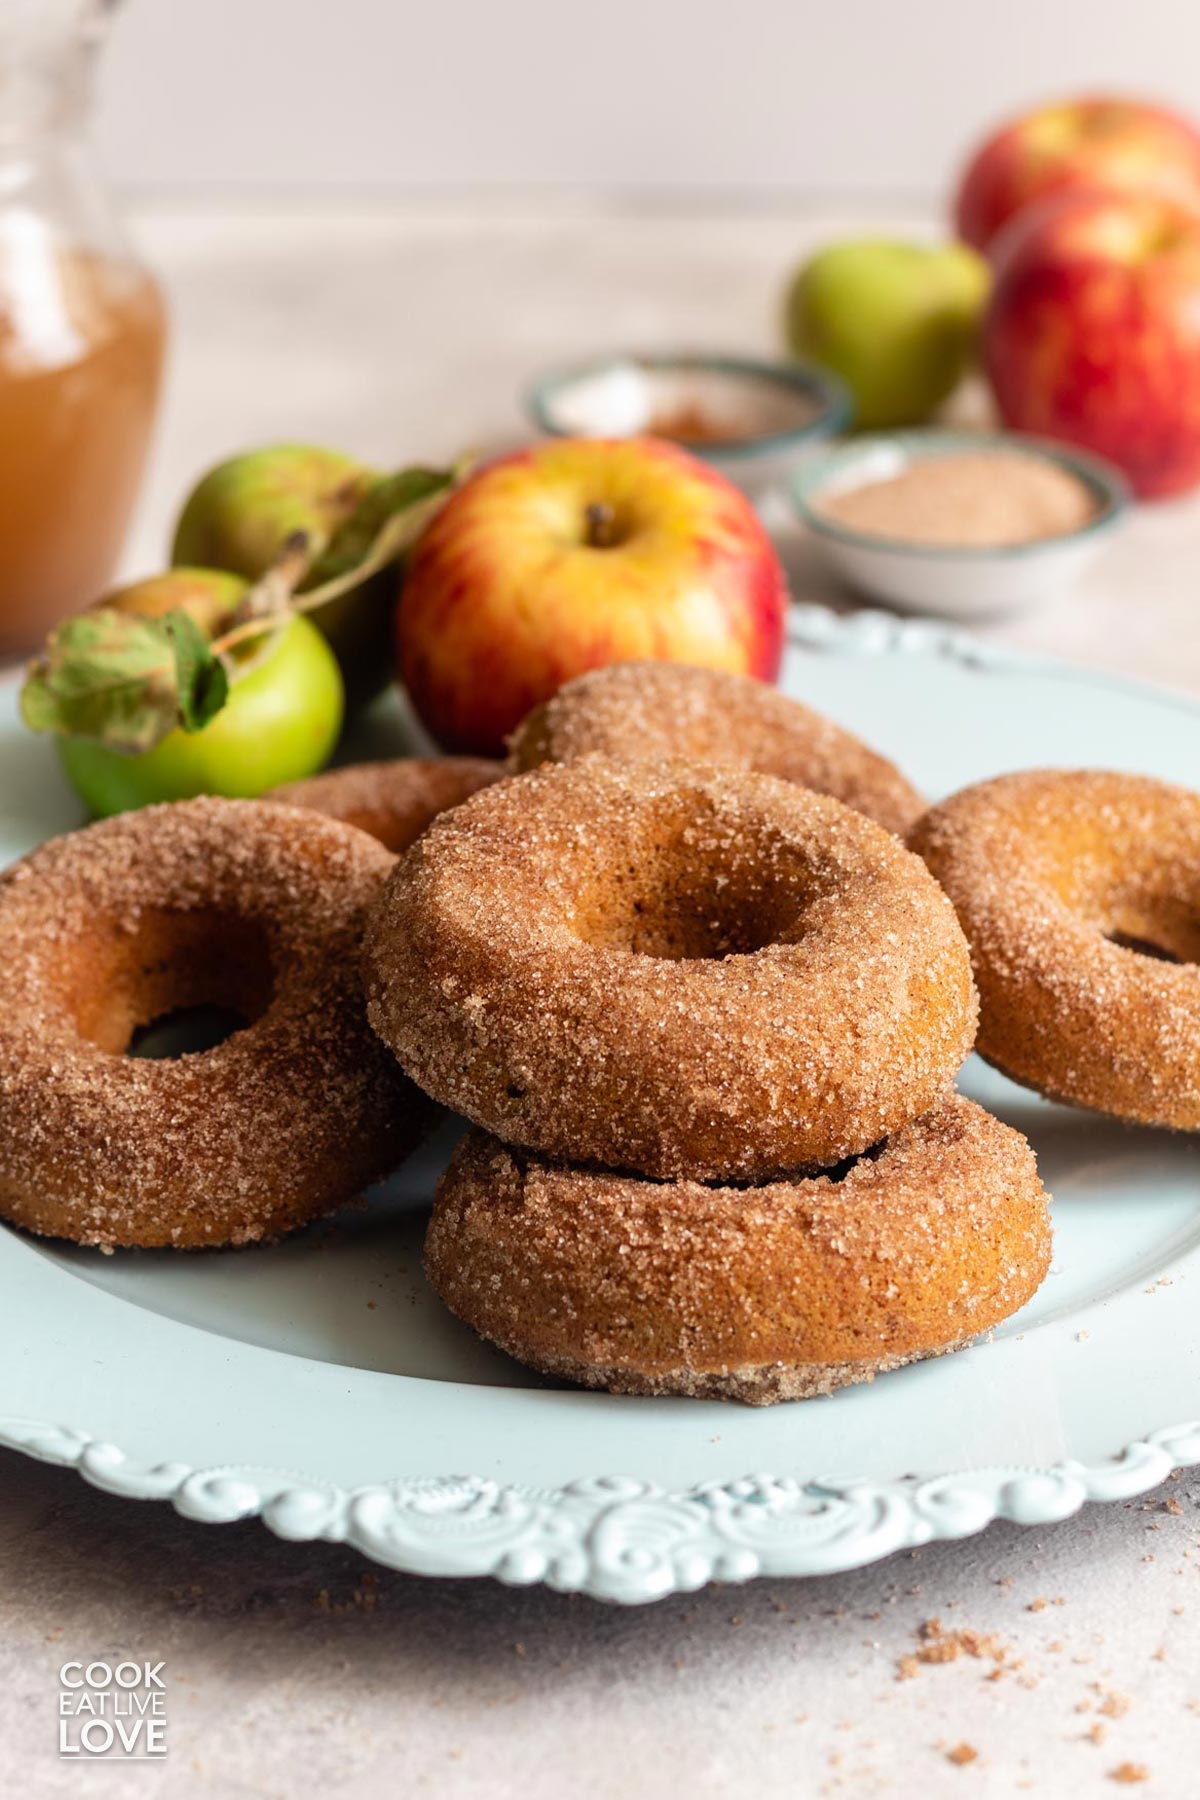 Apple cider doughnuts with sugar cinnamon coating on a blue platter.